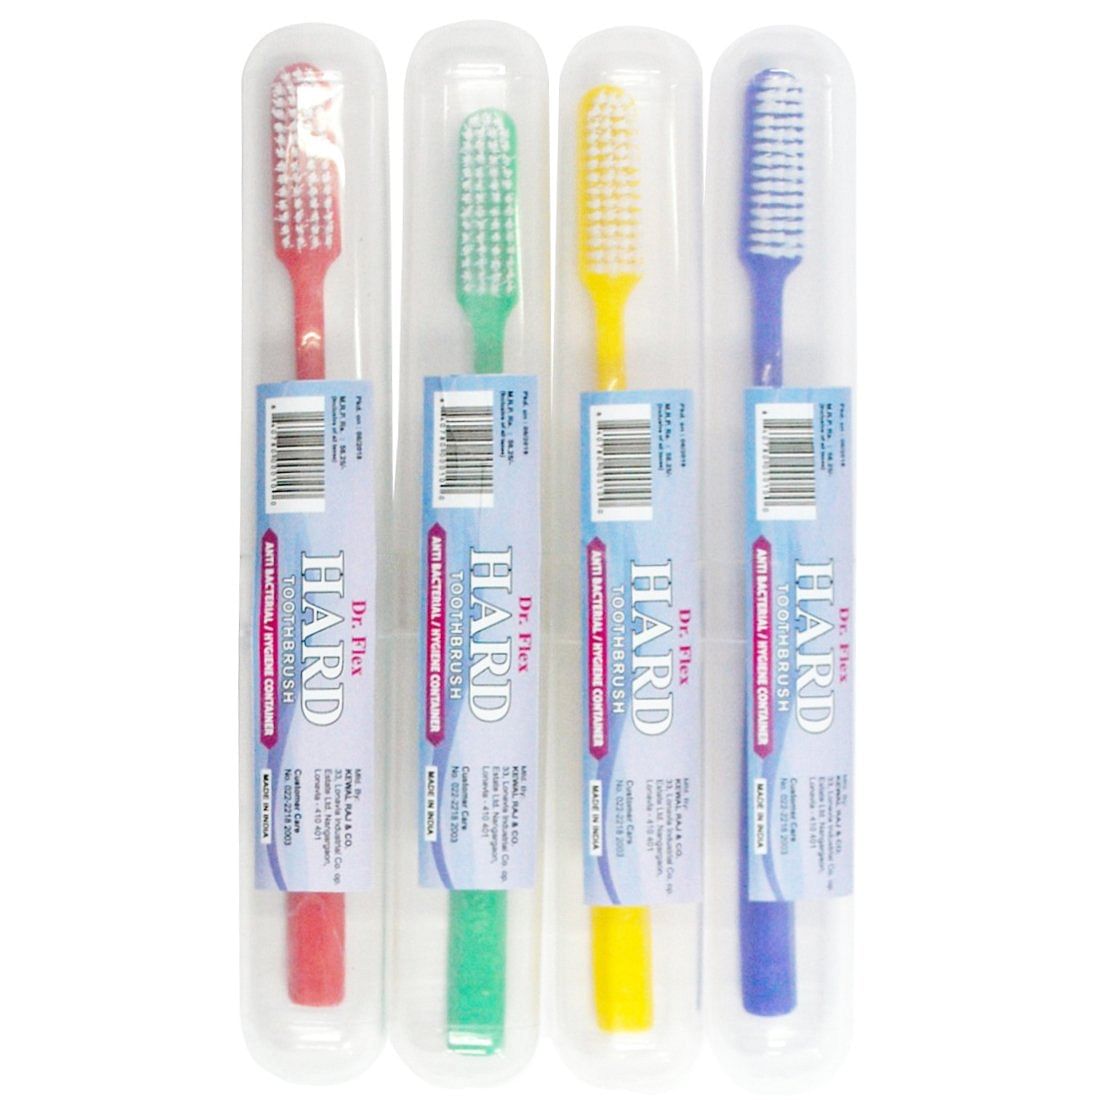 Dr. Flex Hard Toothbrush with DuPont Filaments in Anti-Bacterial Container